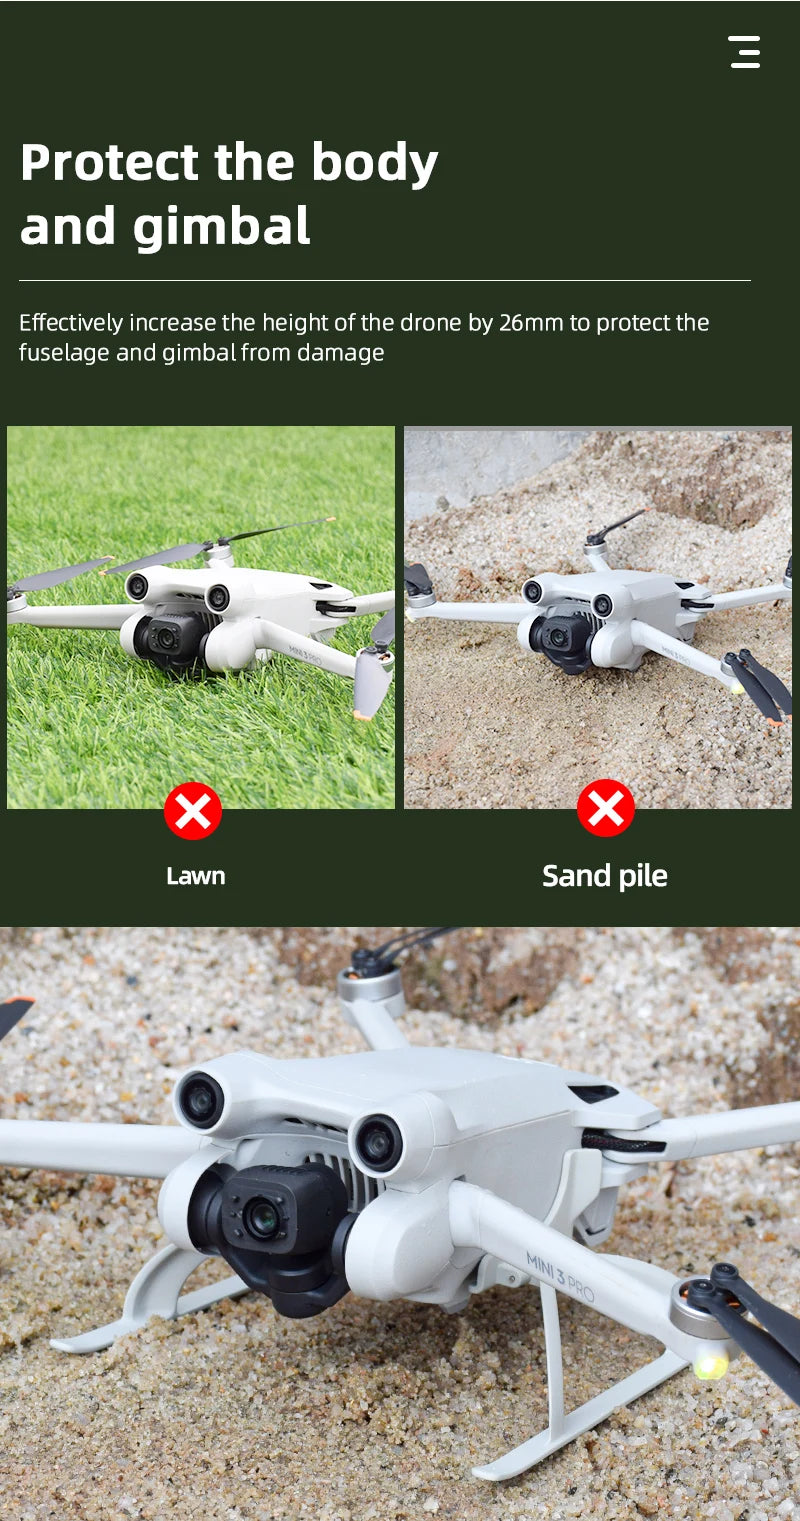 Increase the height of the drone by 26mm to protect the fuselage and gimbal